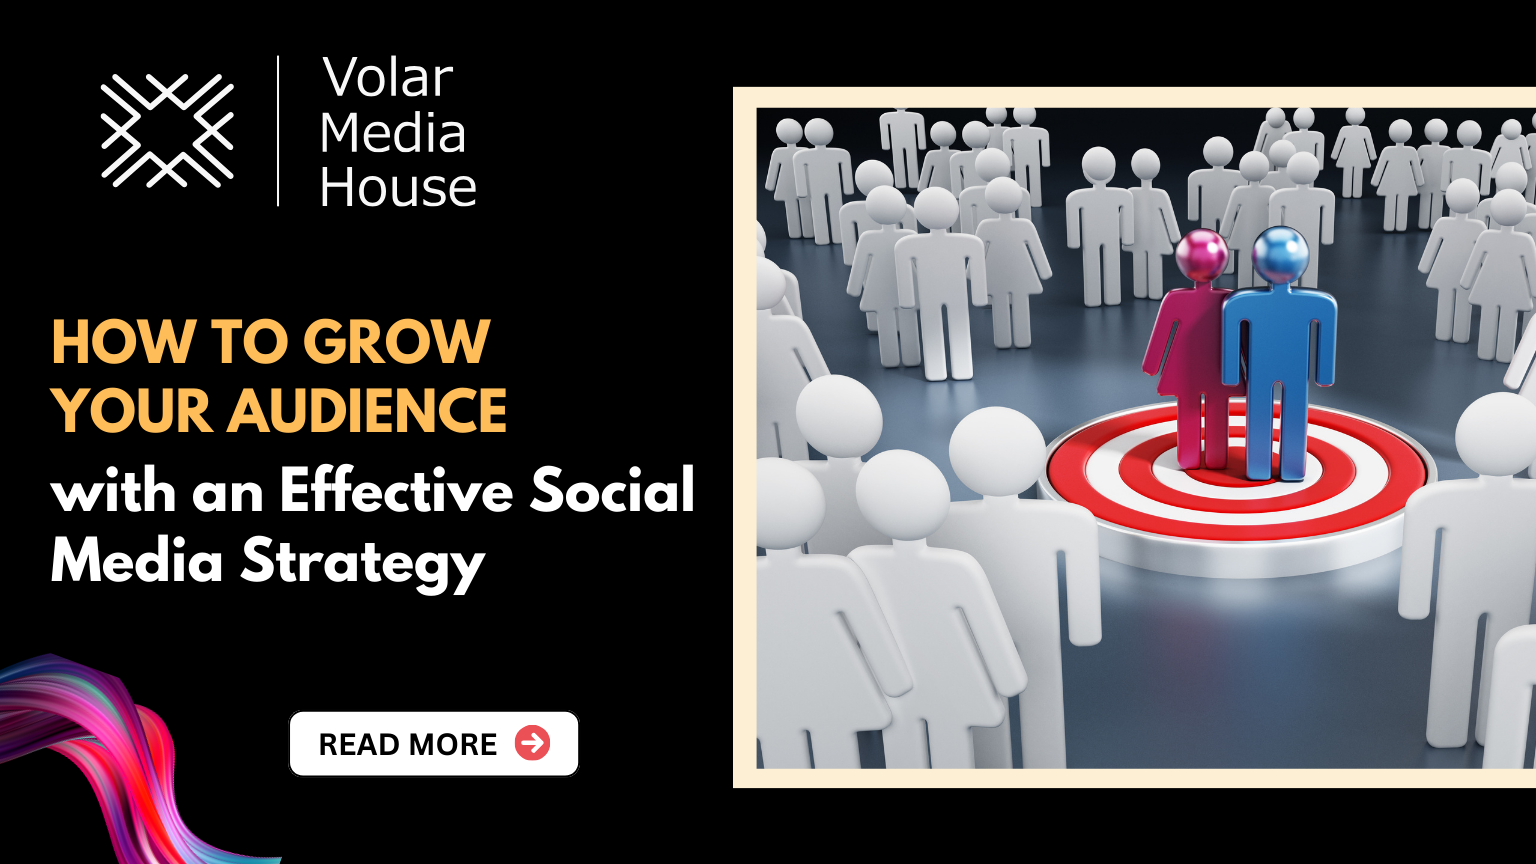 How to Grow Your Audience with an Effective Social Media Strategy